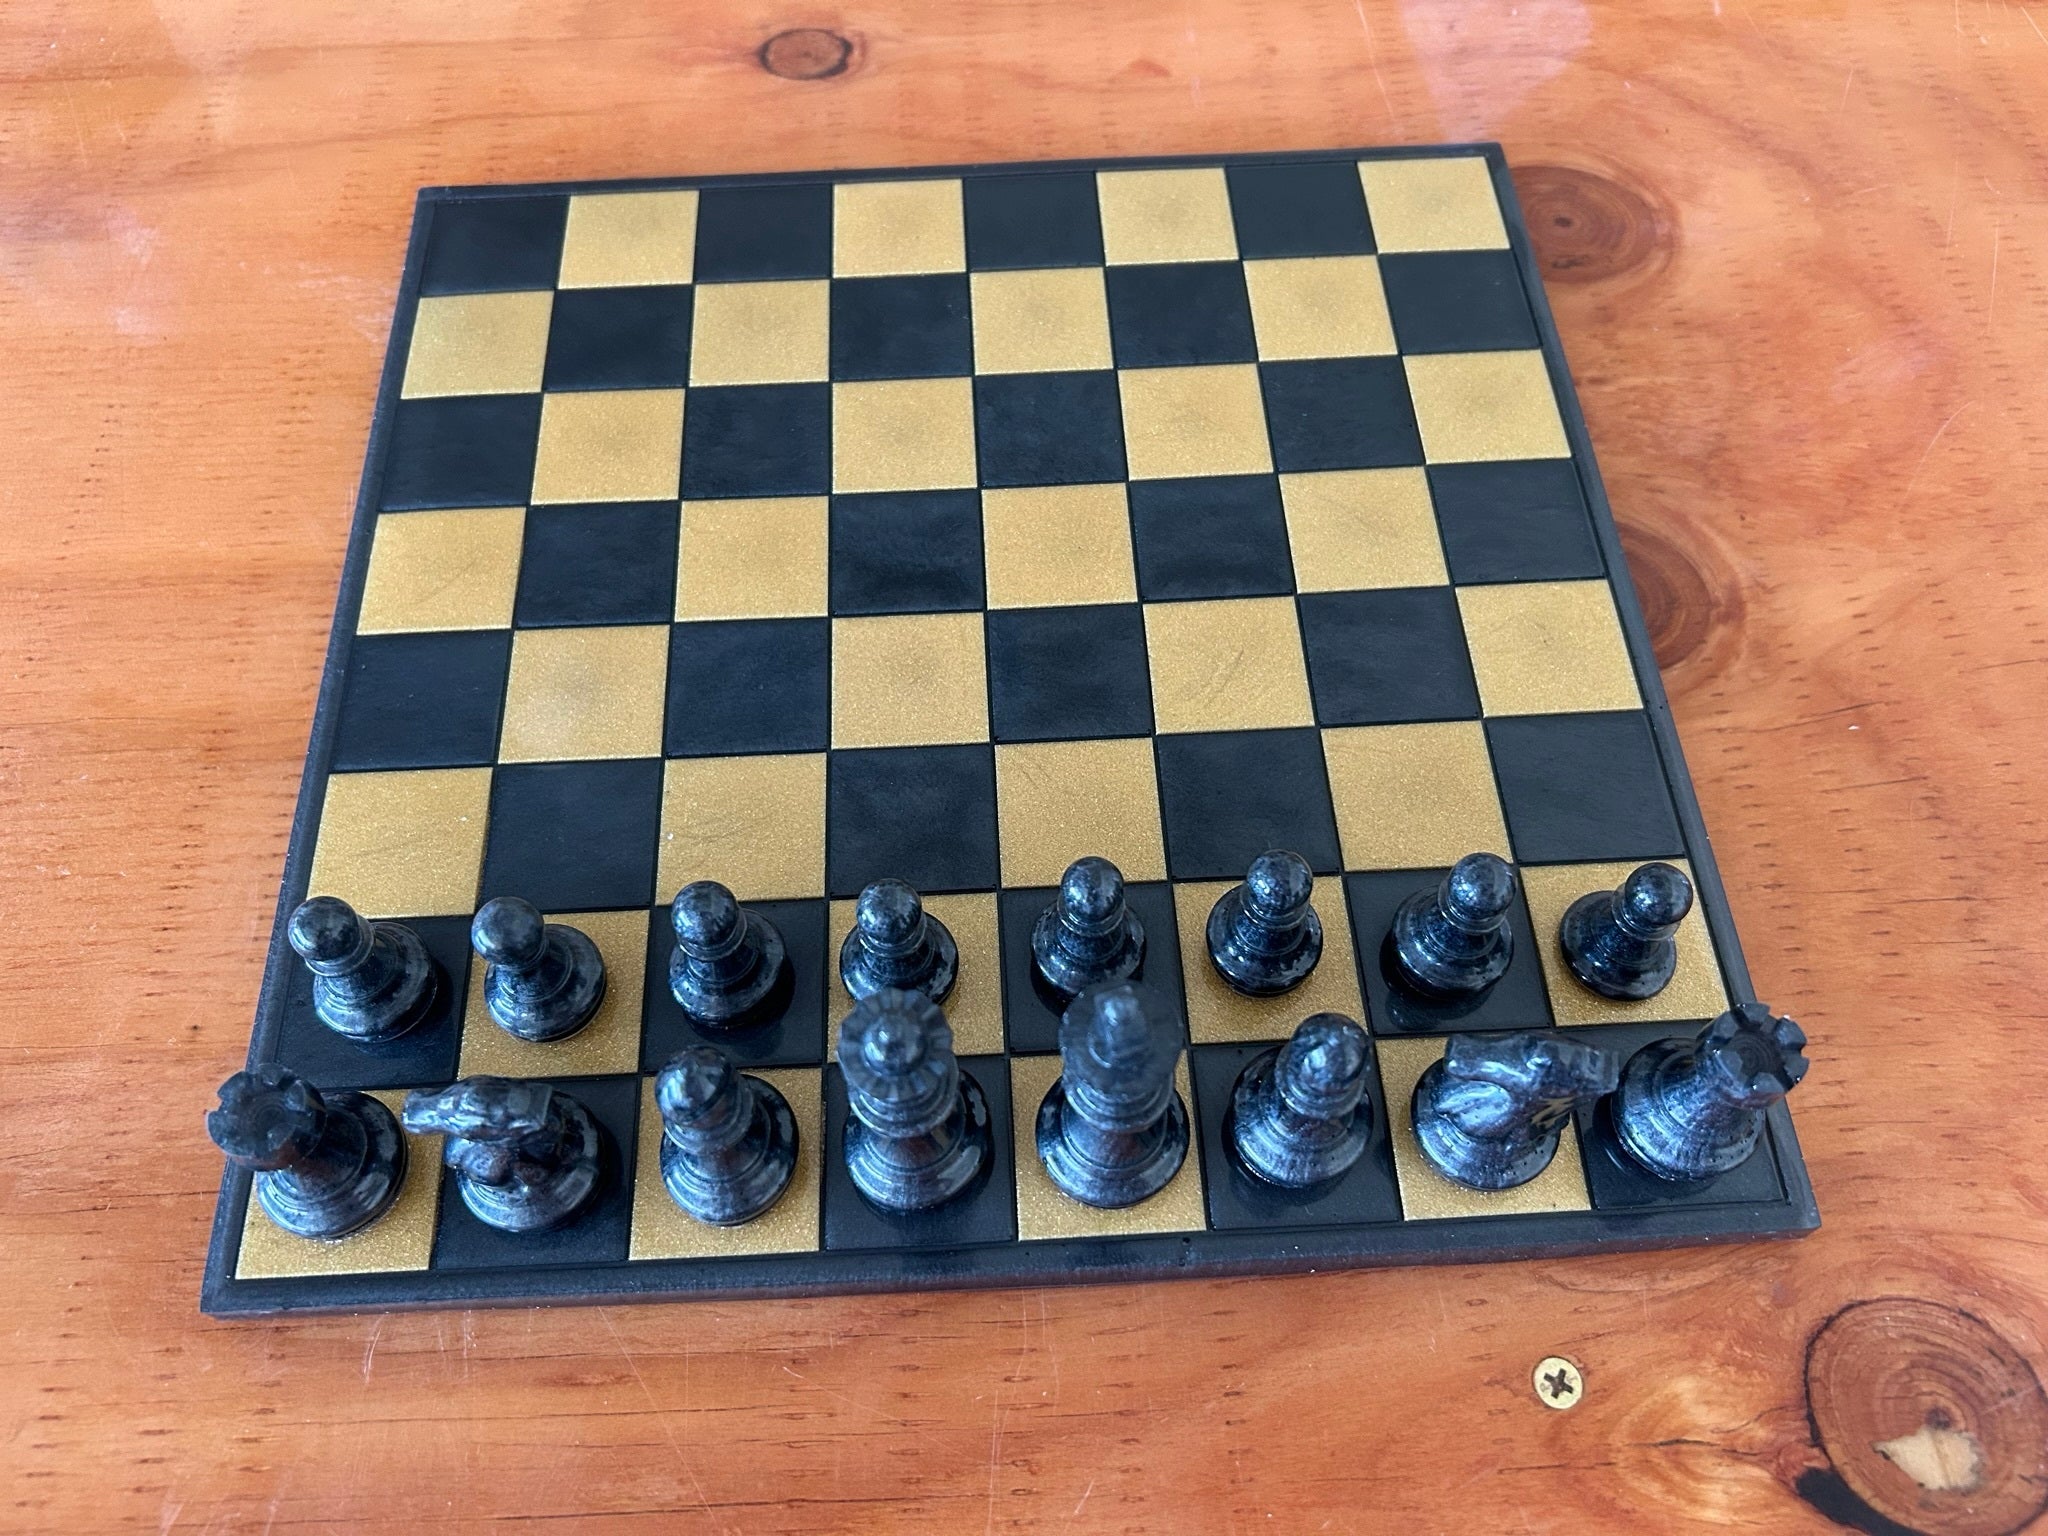 Resin Chess Pieces, Projects